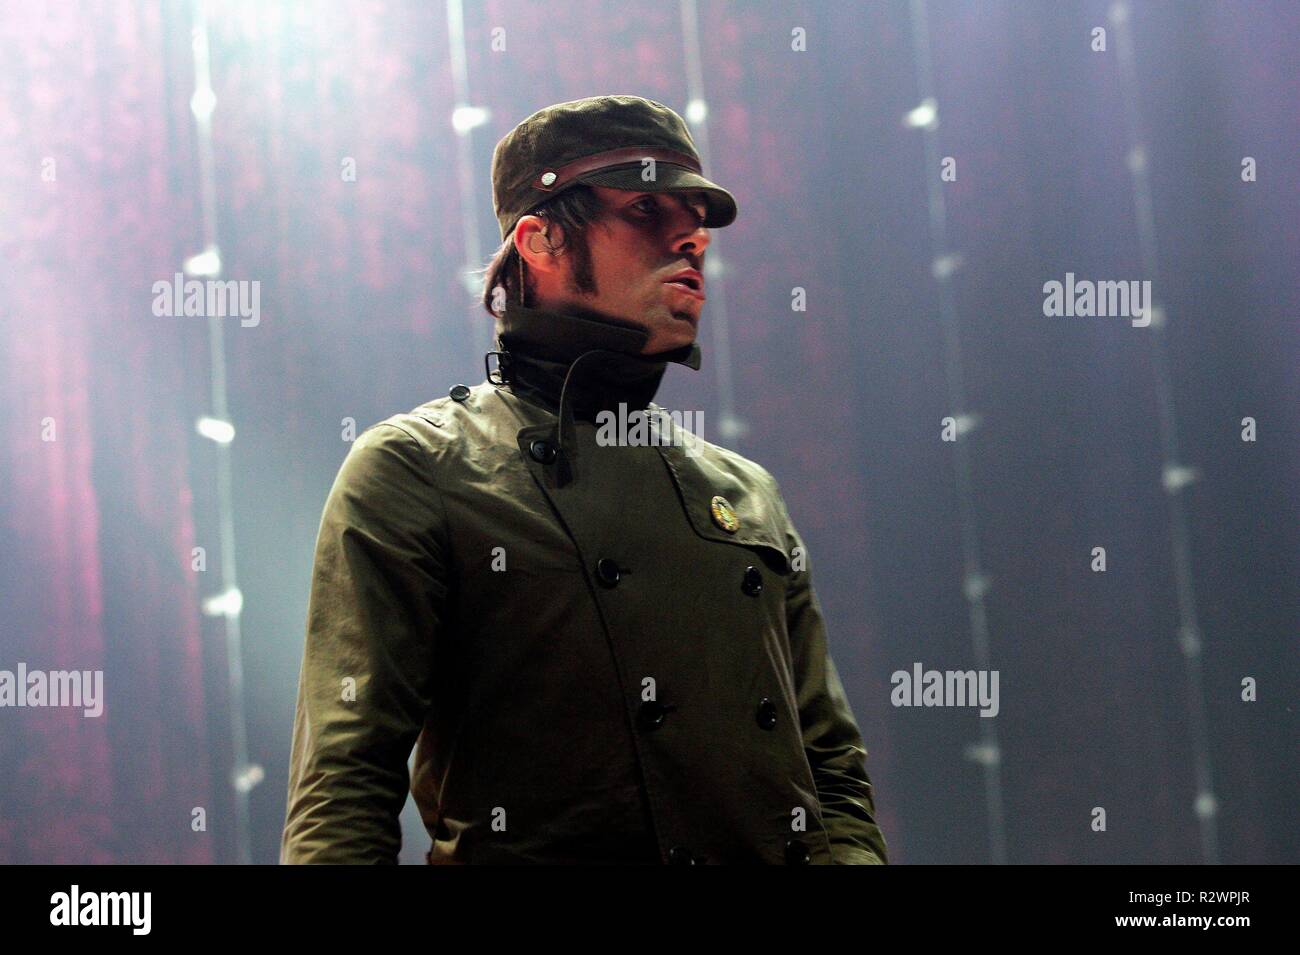 LIAM GALLAGHER OASIS 20 octobre 2005 CTS Allstar61892/Cinetext/Hambourg Banque D'Images